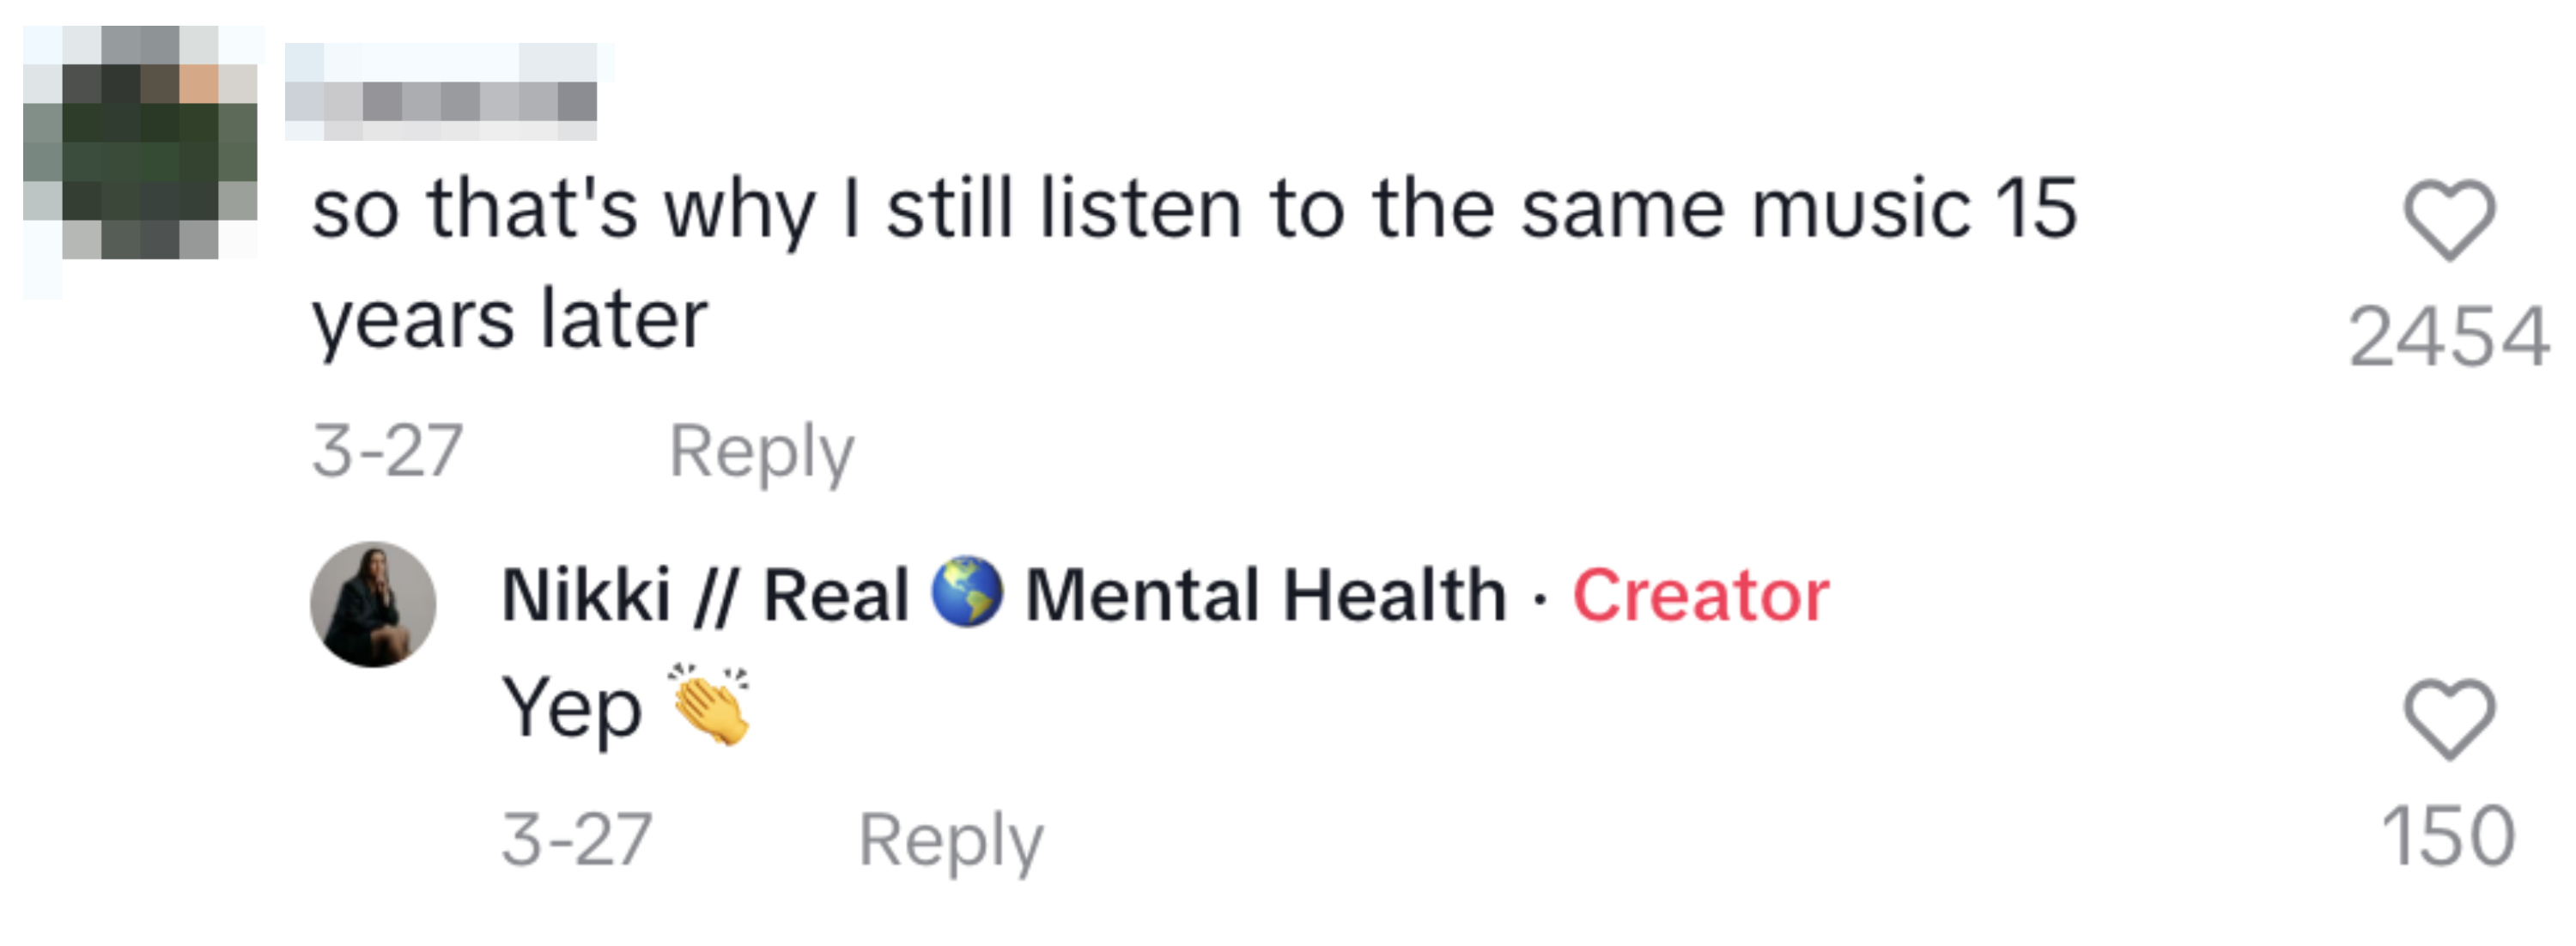 Comment exchange discussing reasons for listening to the same music for 15 years